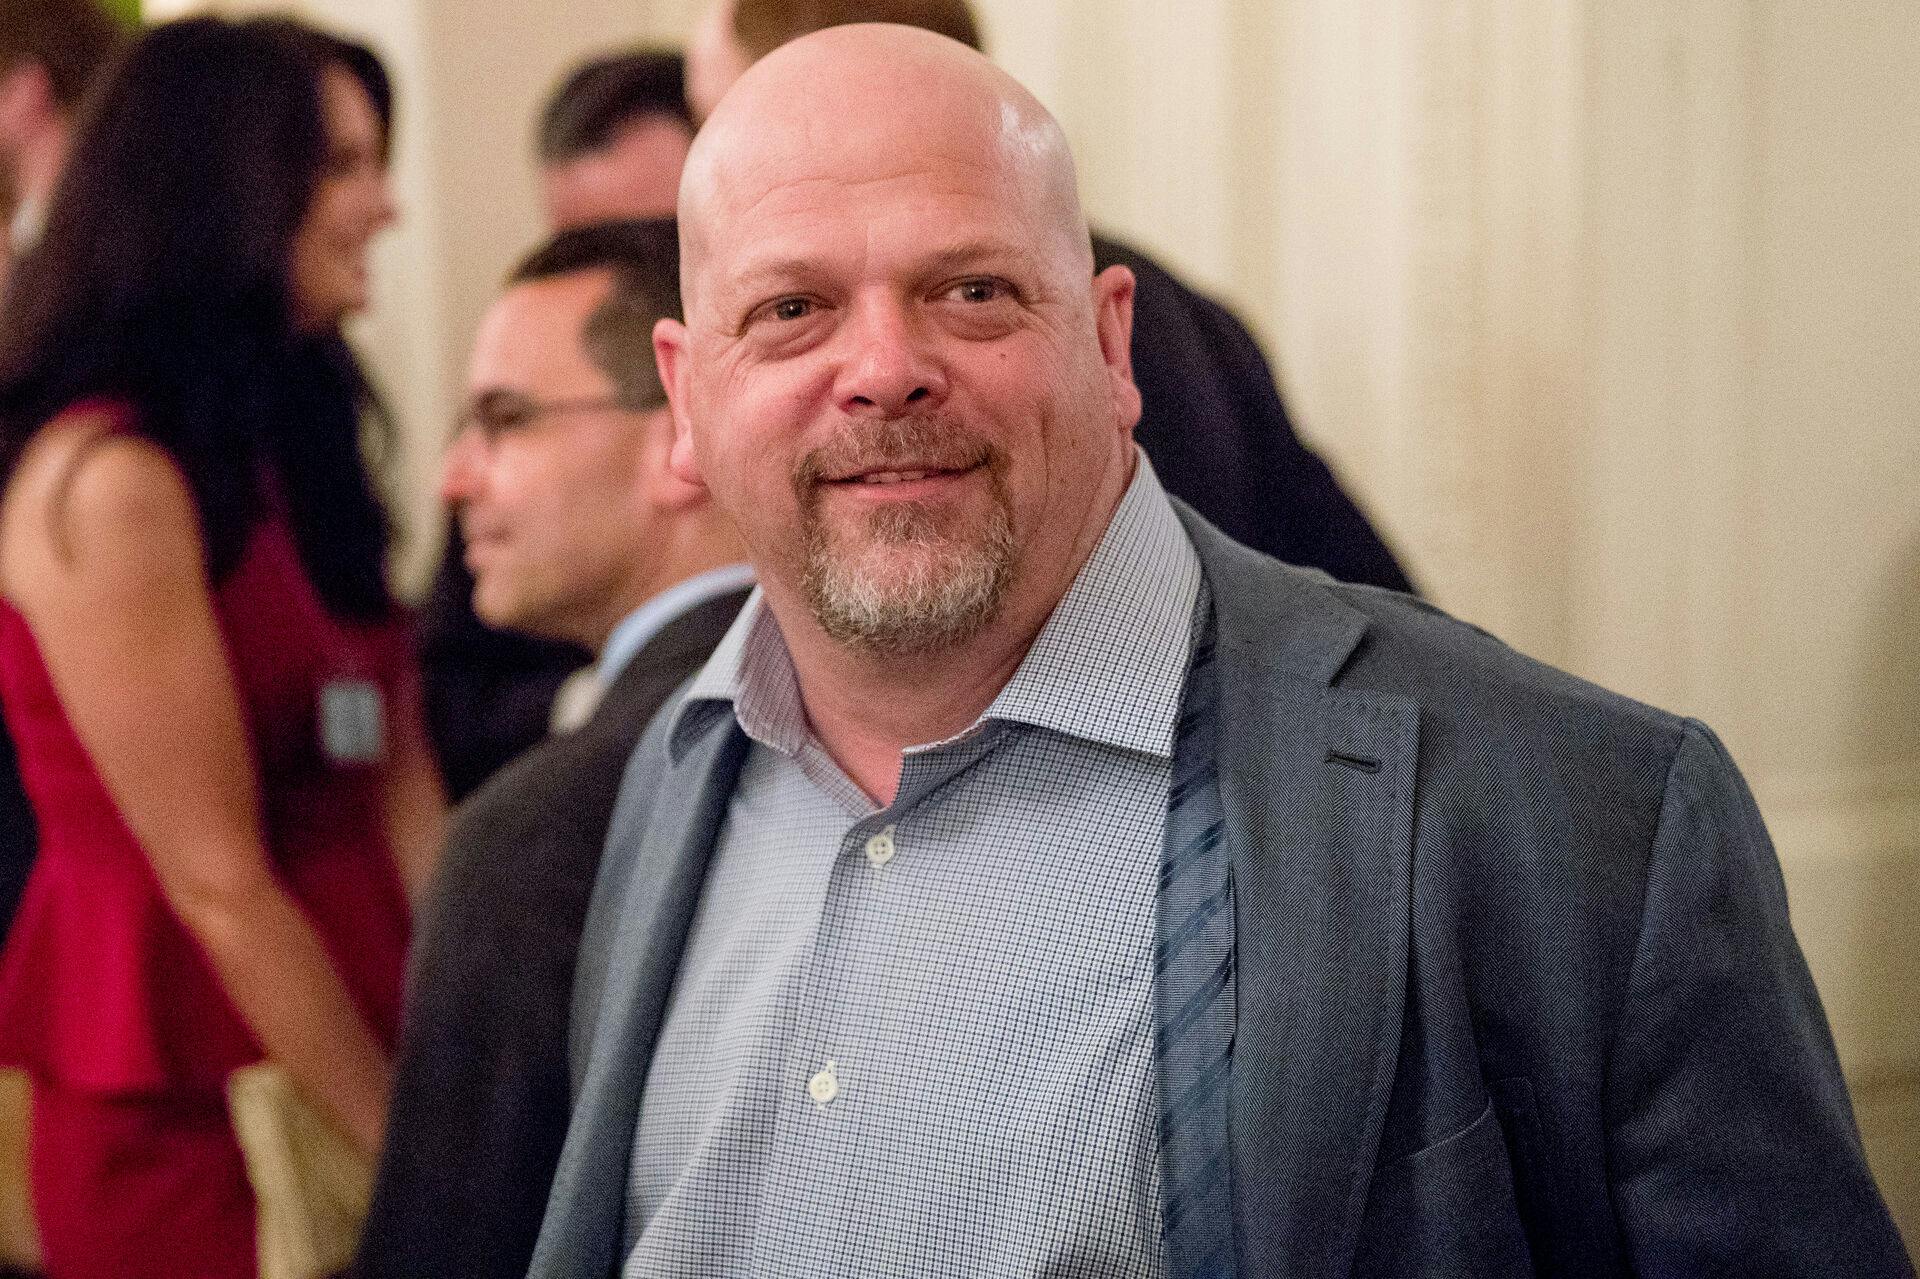 Rick Harrison, who appears on the television show Pawn Stars, arrives for a reception for Senators and their spouses in the East Room of the White House, Tuesday, March 28, 2017, in Washington. (AP Photo/Andrew Harnik)